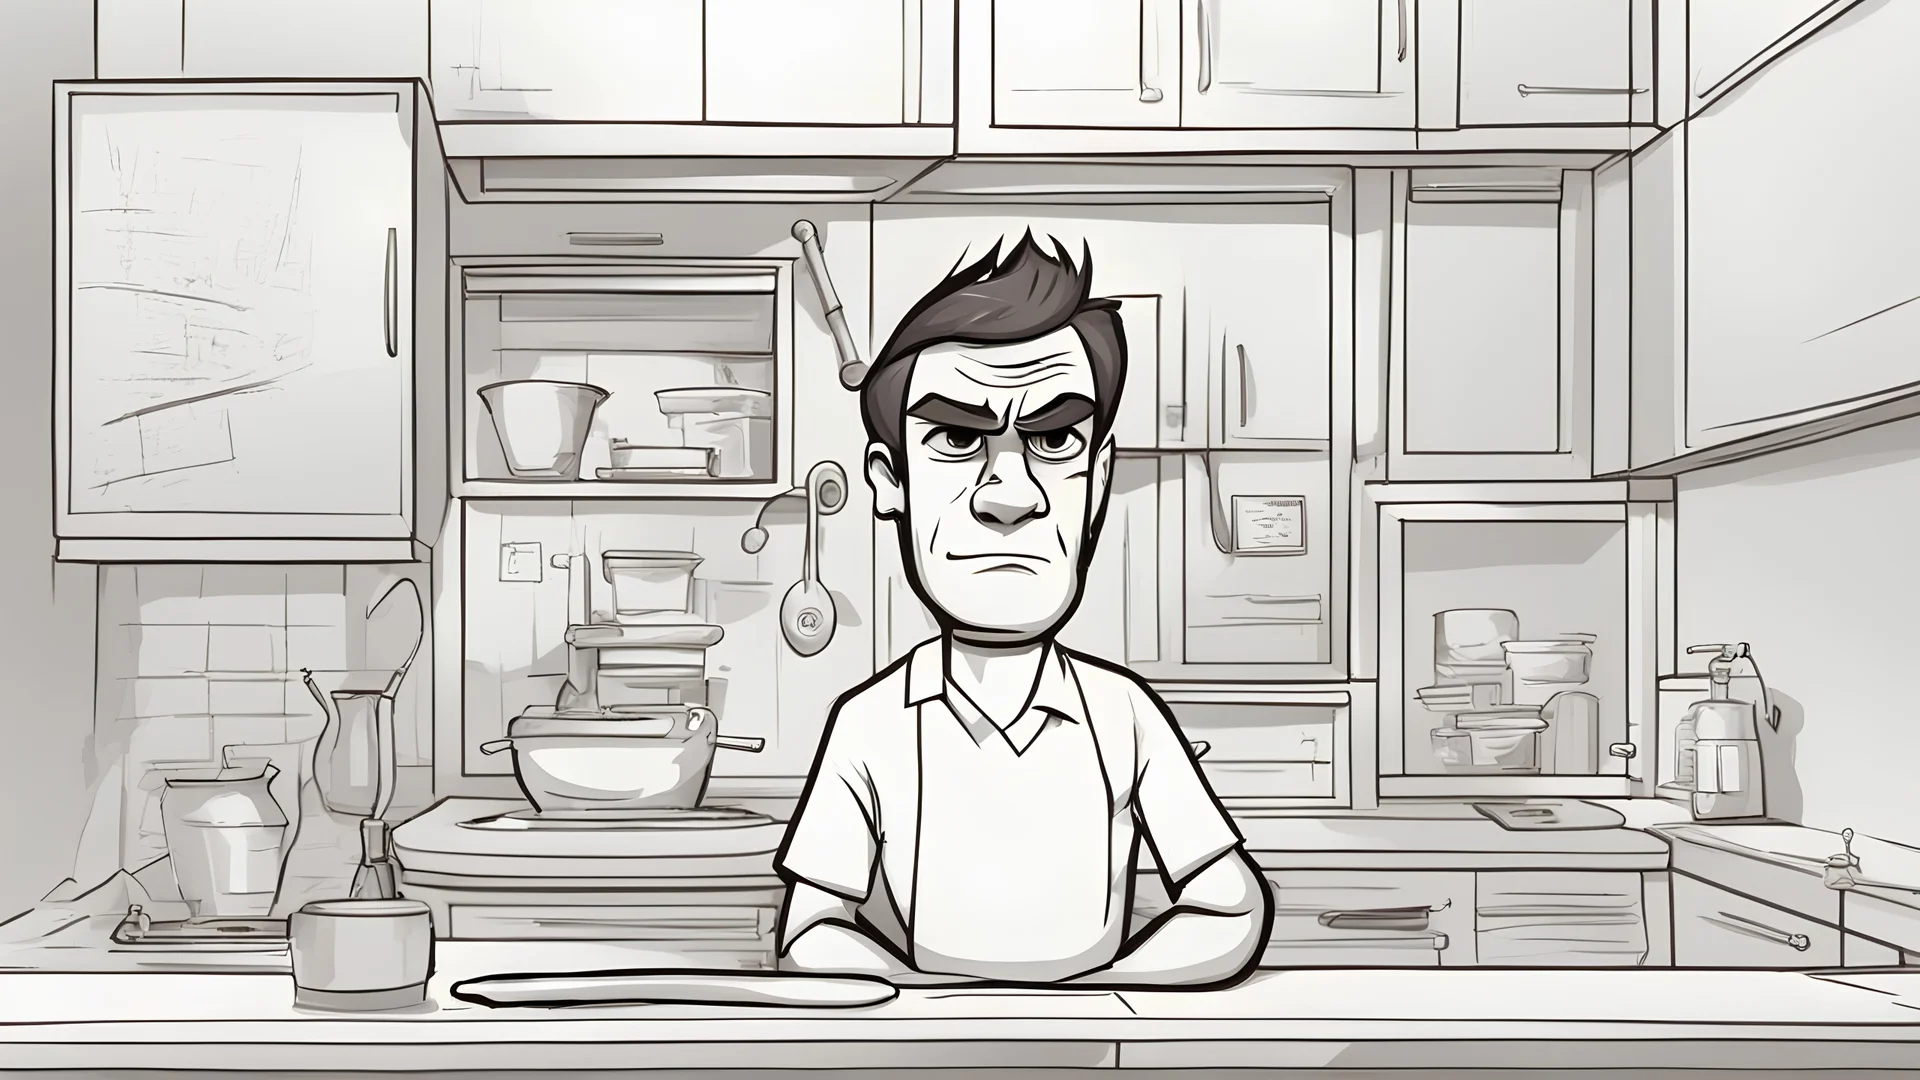 Dexter cartoon character image for making sketch